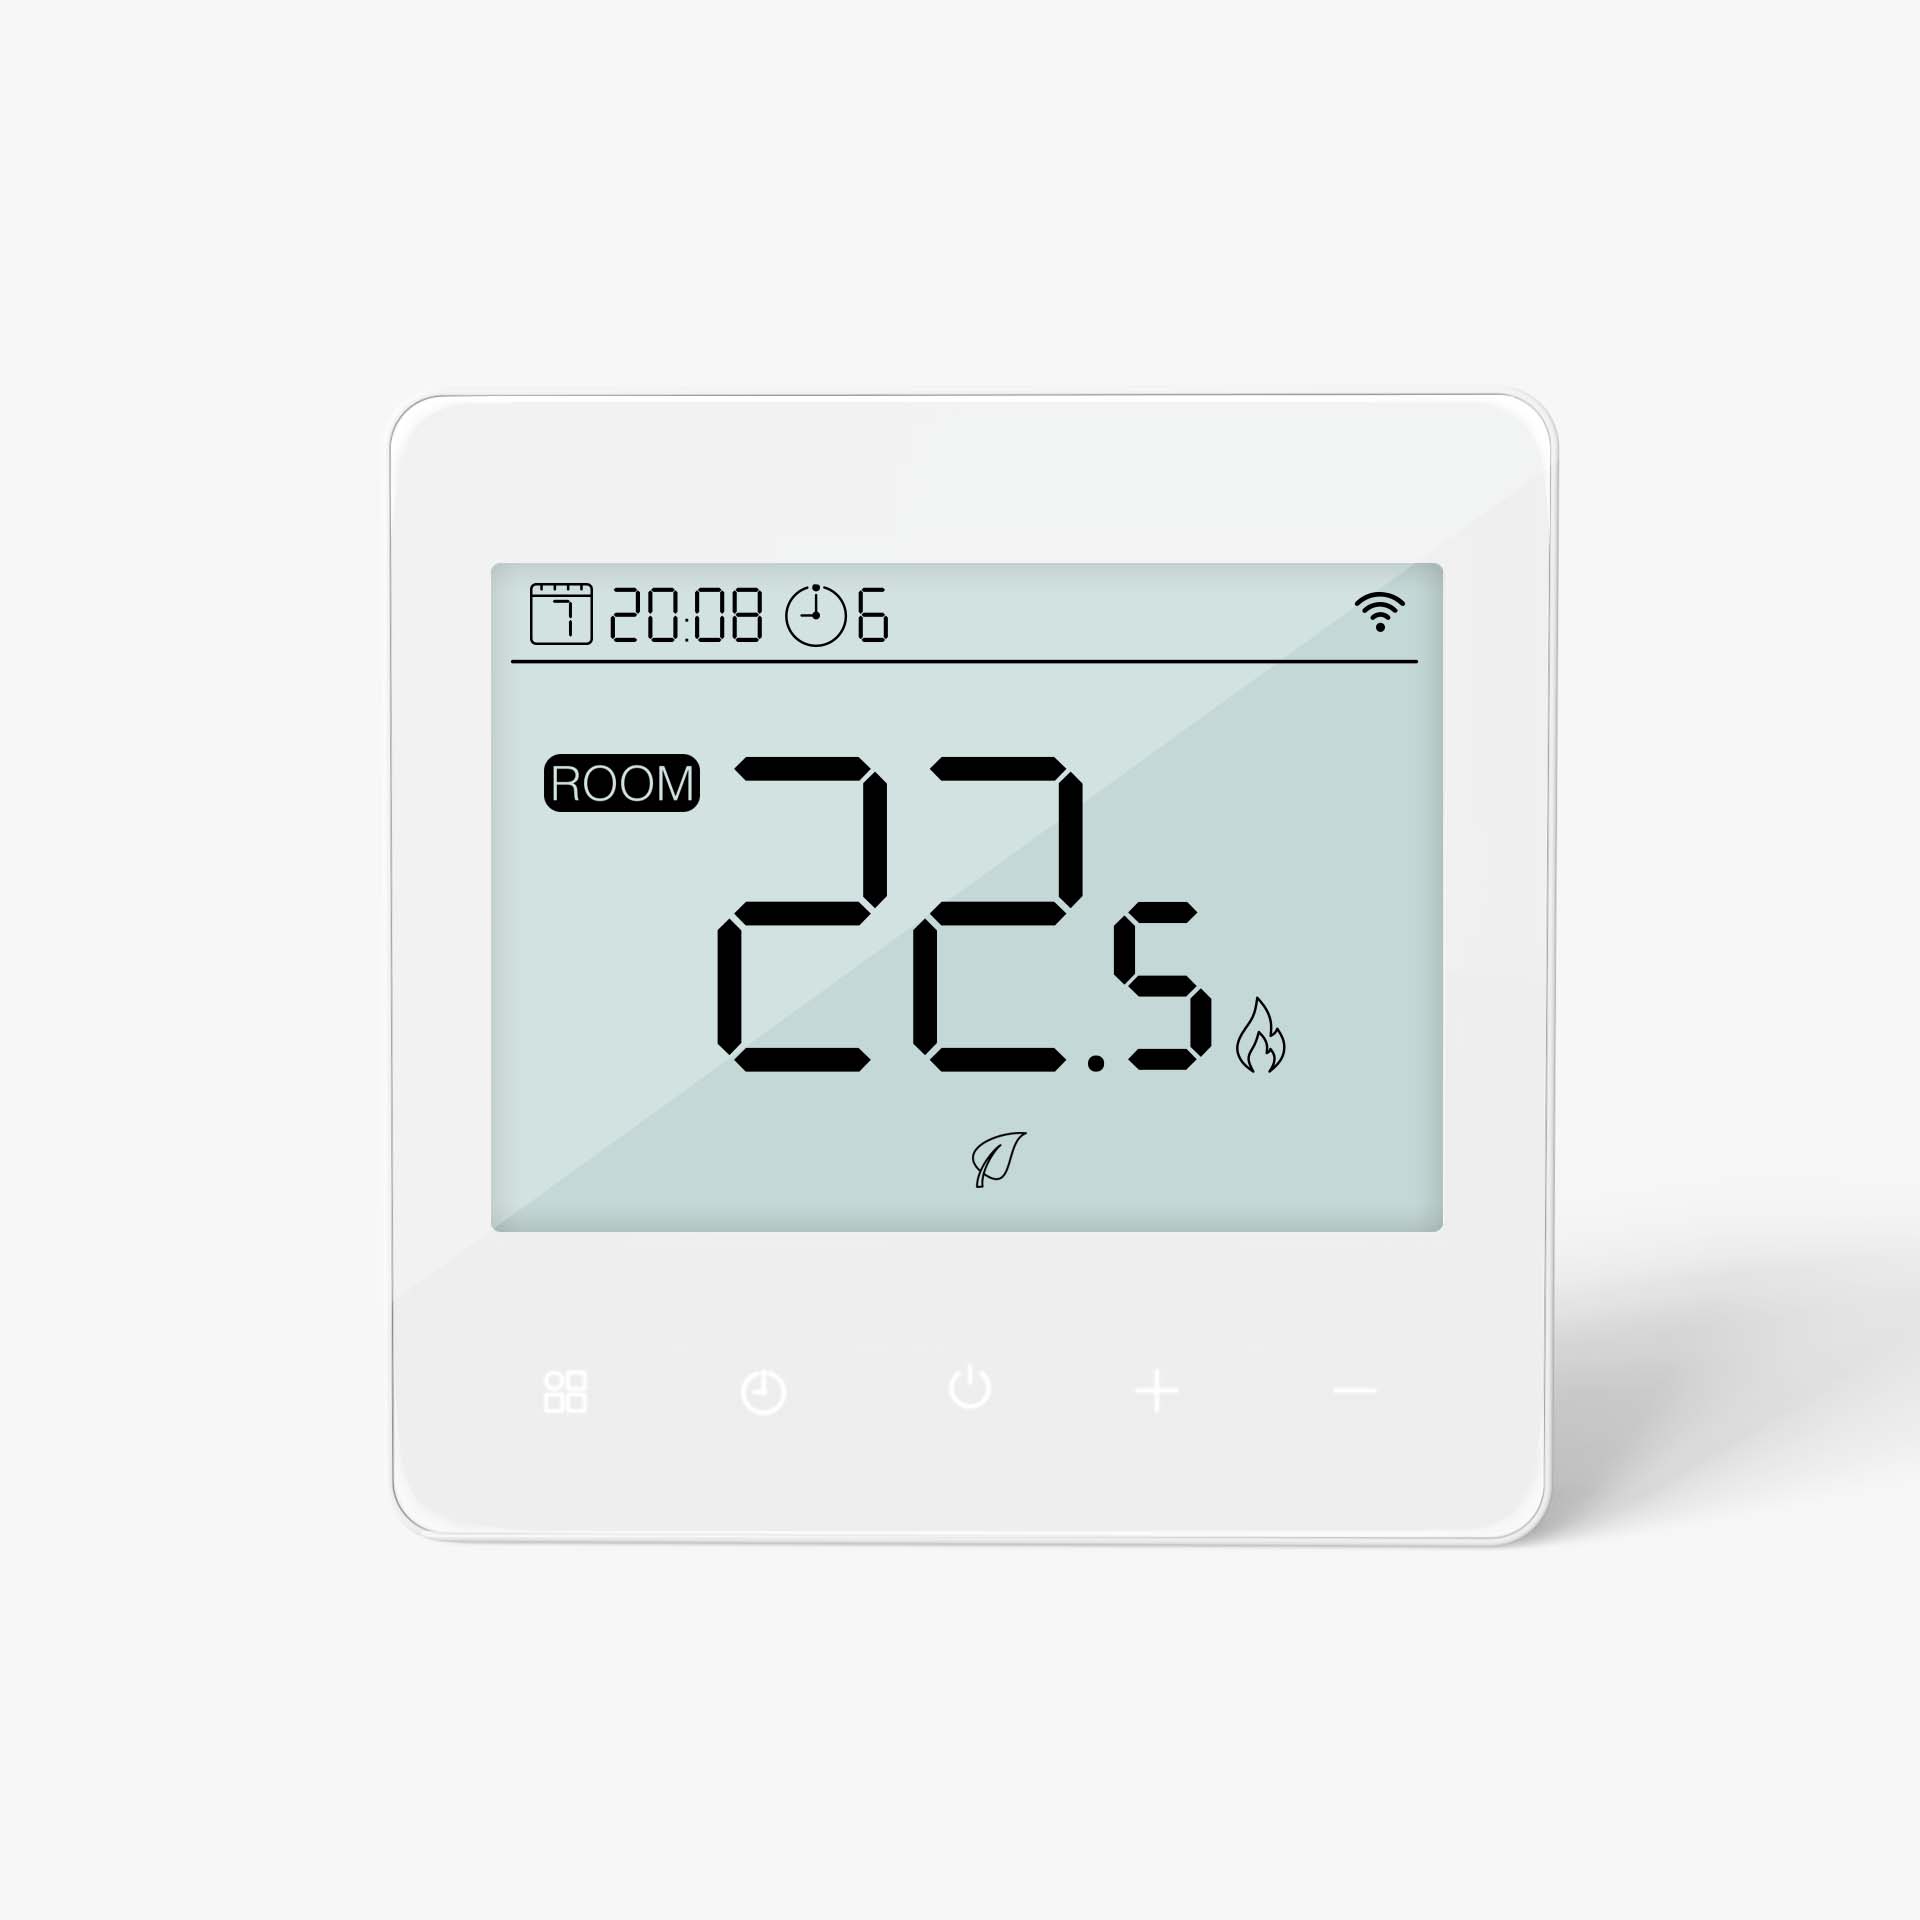 New design thermostats